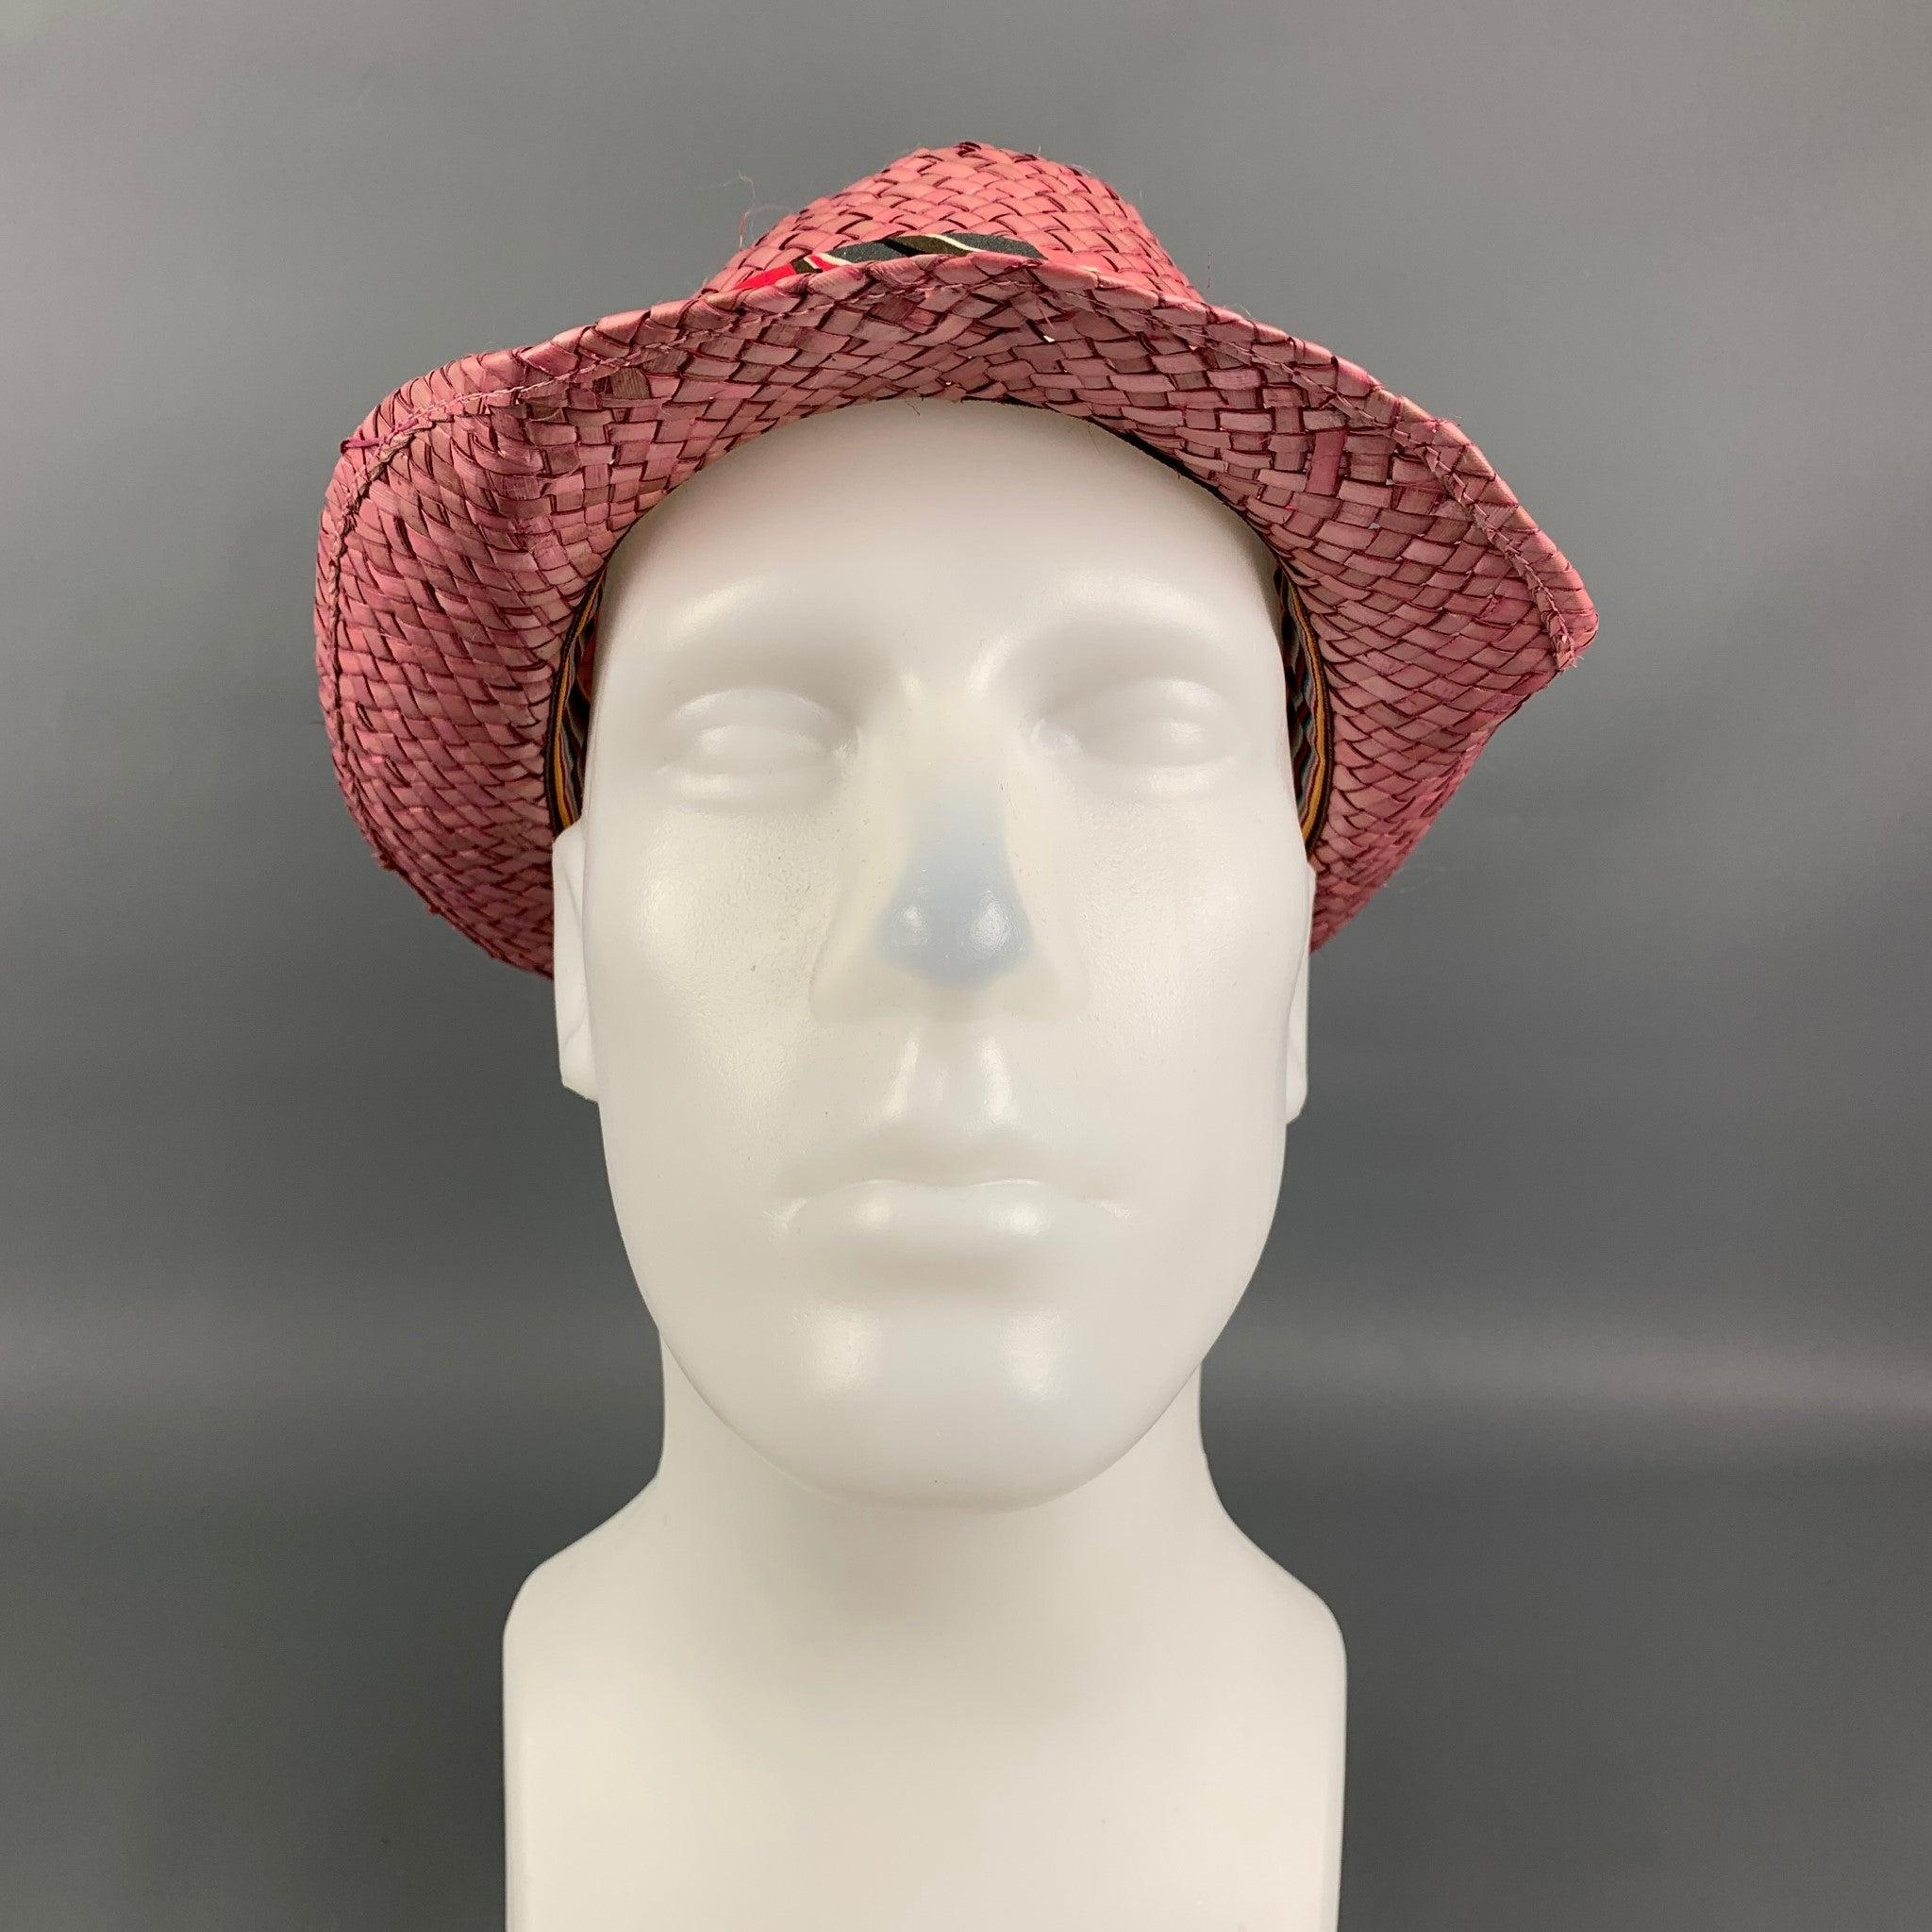 PAUL SMITH Pink Woven Straw Floral Band Hat In Good Condition For Sale In San Francisco, CA